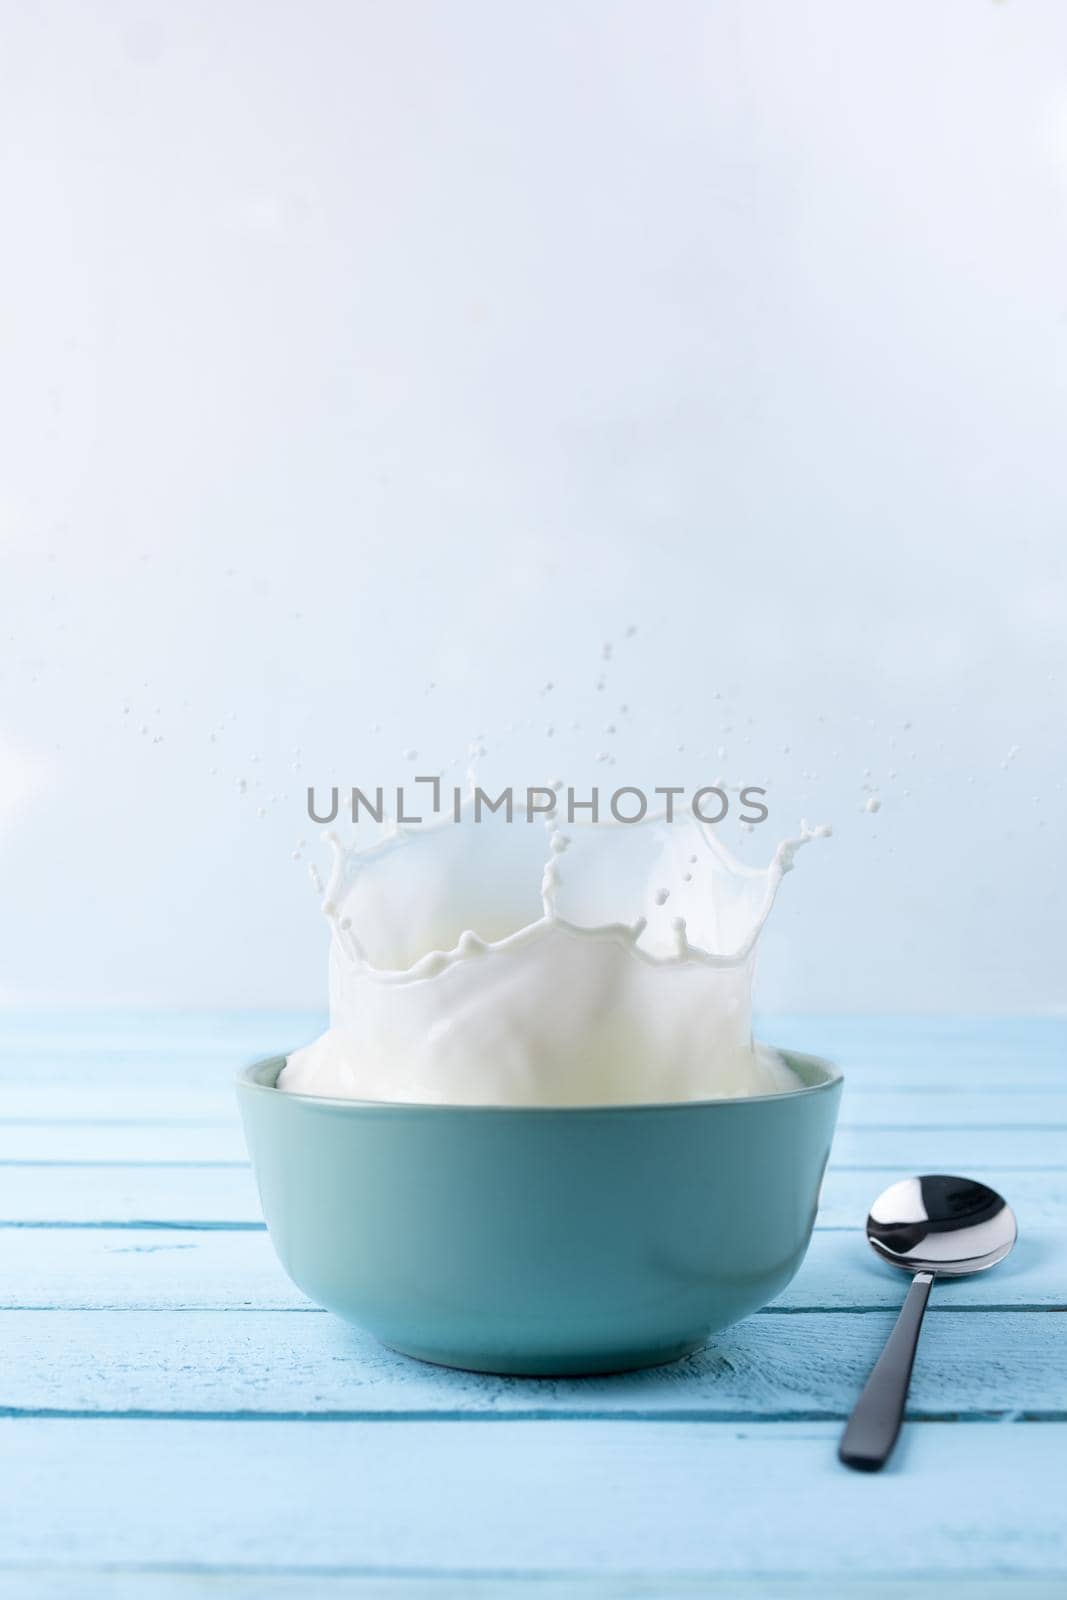 Splash of milk from the dish on a blue wooden background